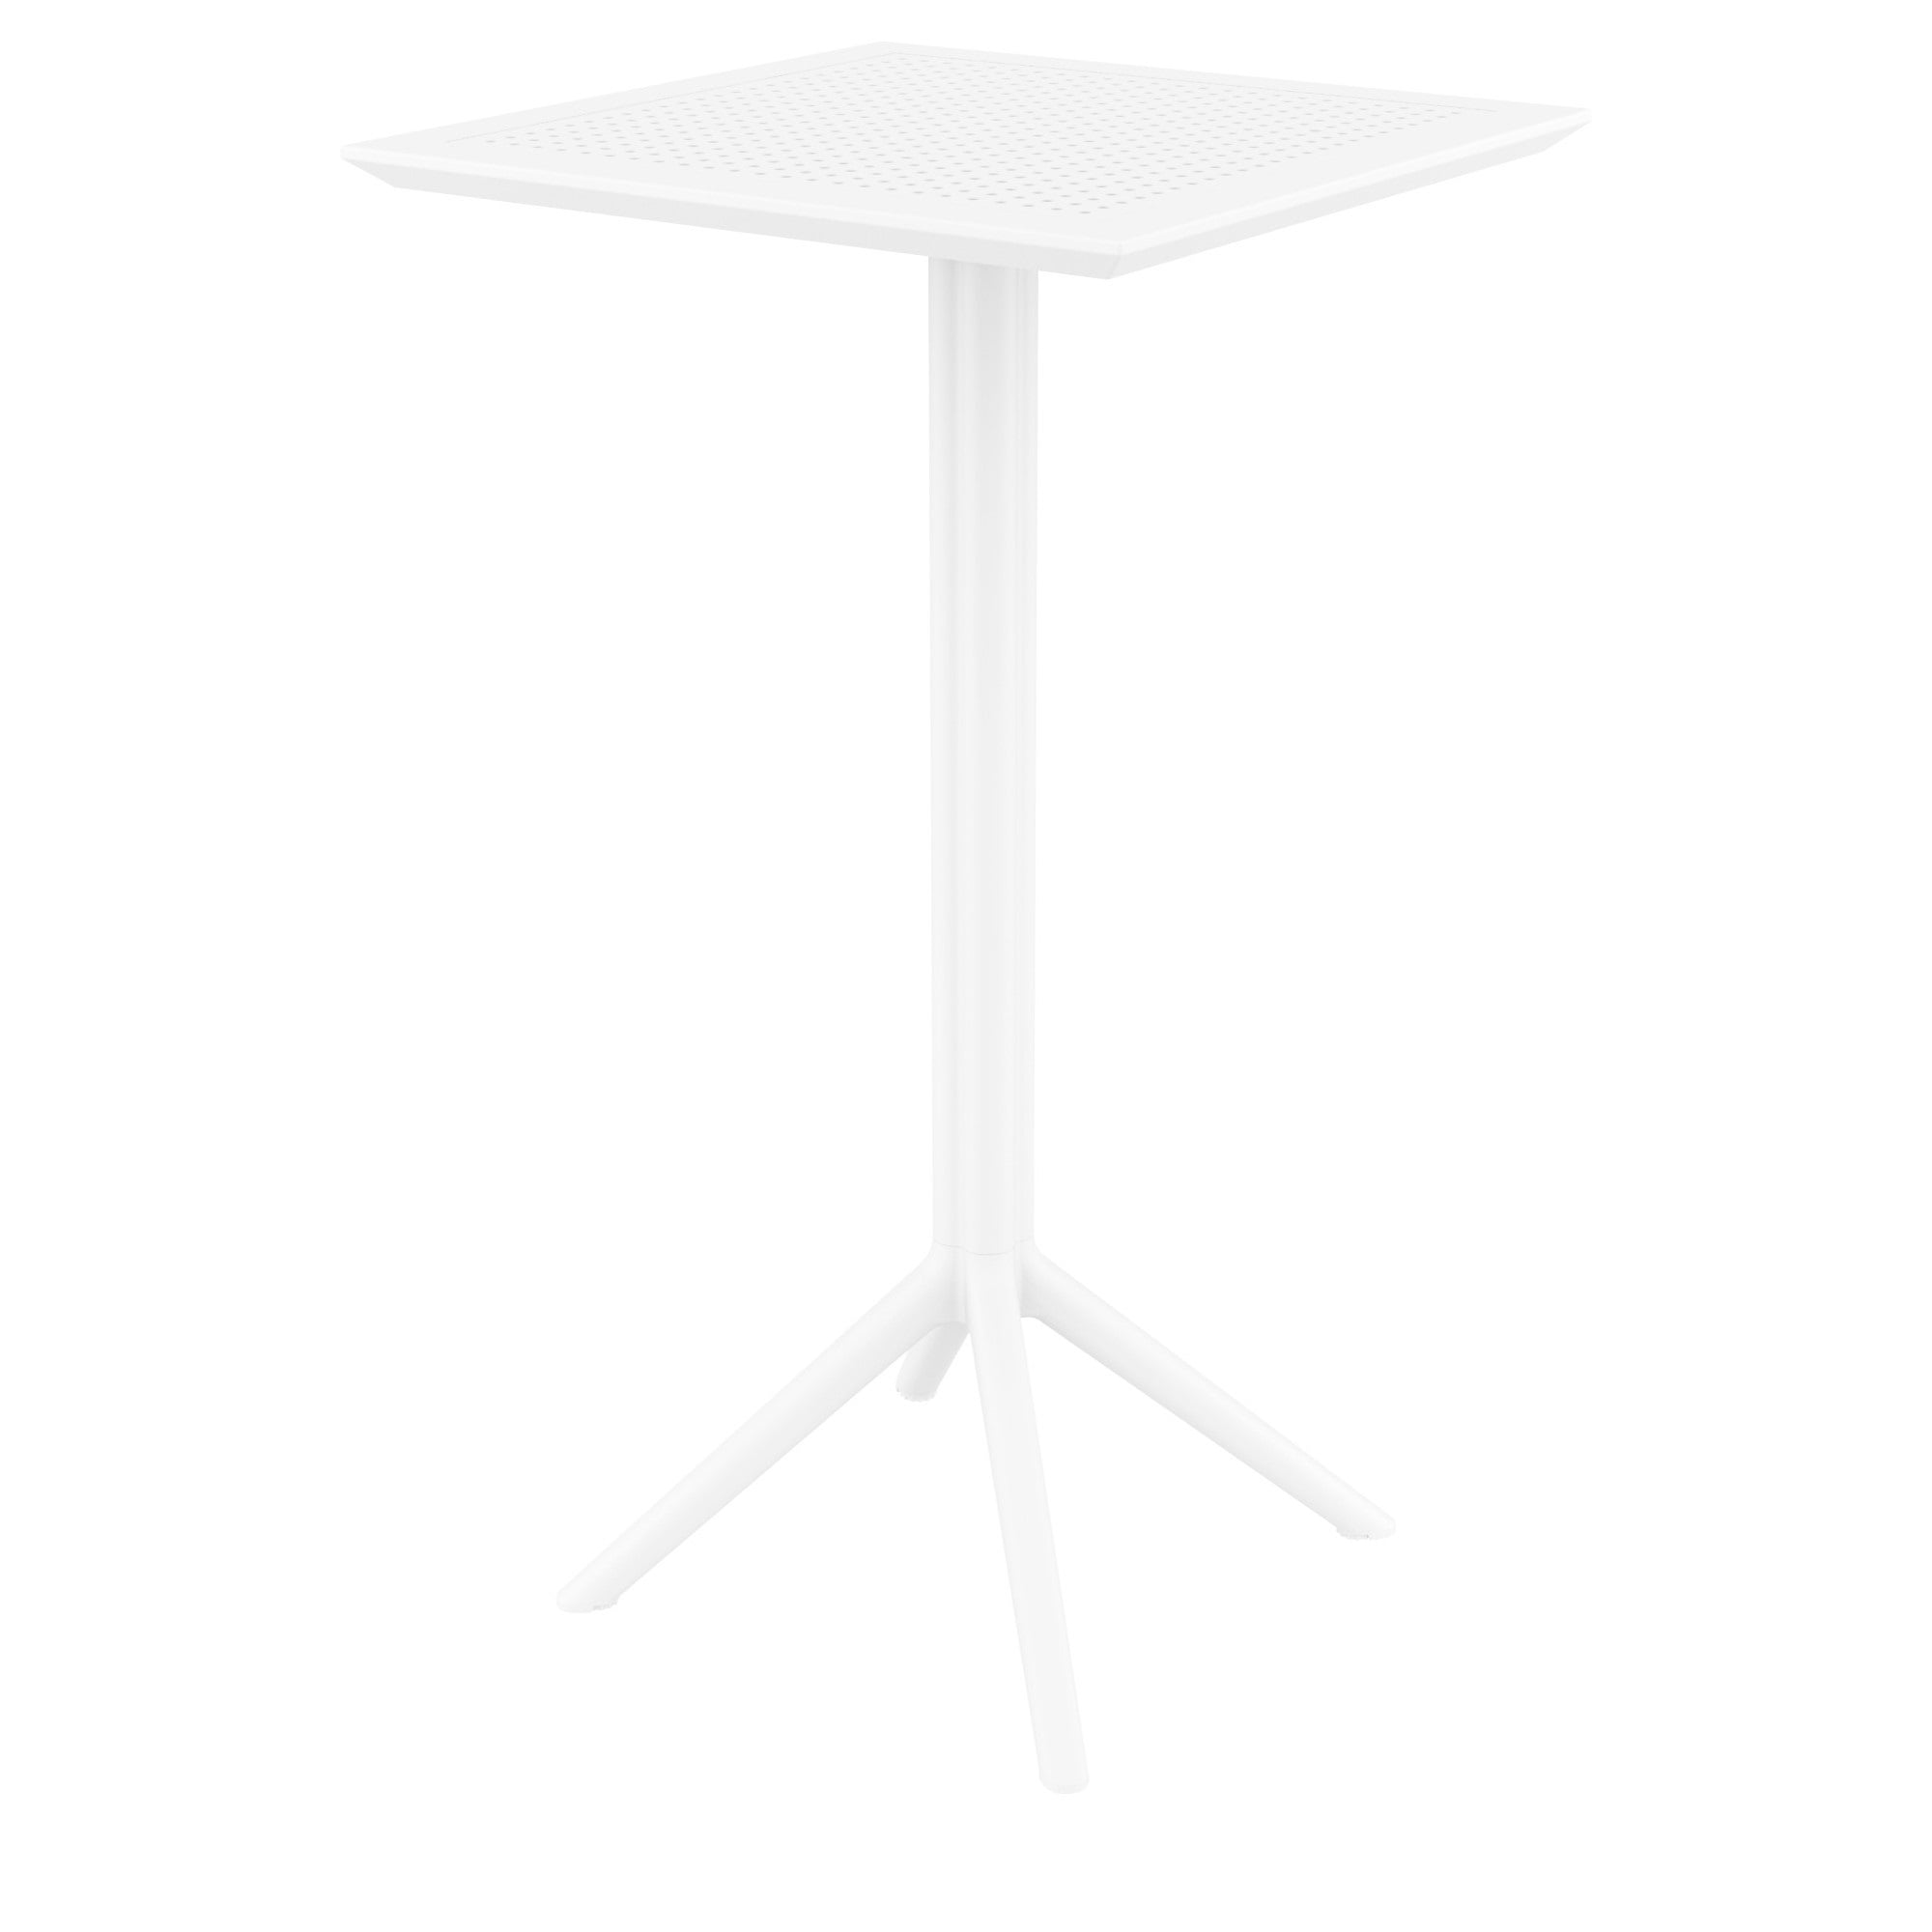 Isp116-whi 24 In. Sky Outdoor Folding Bar Table - White, Square